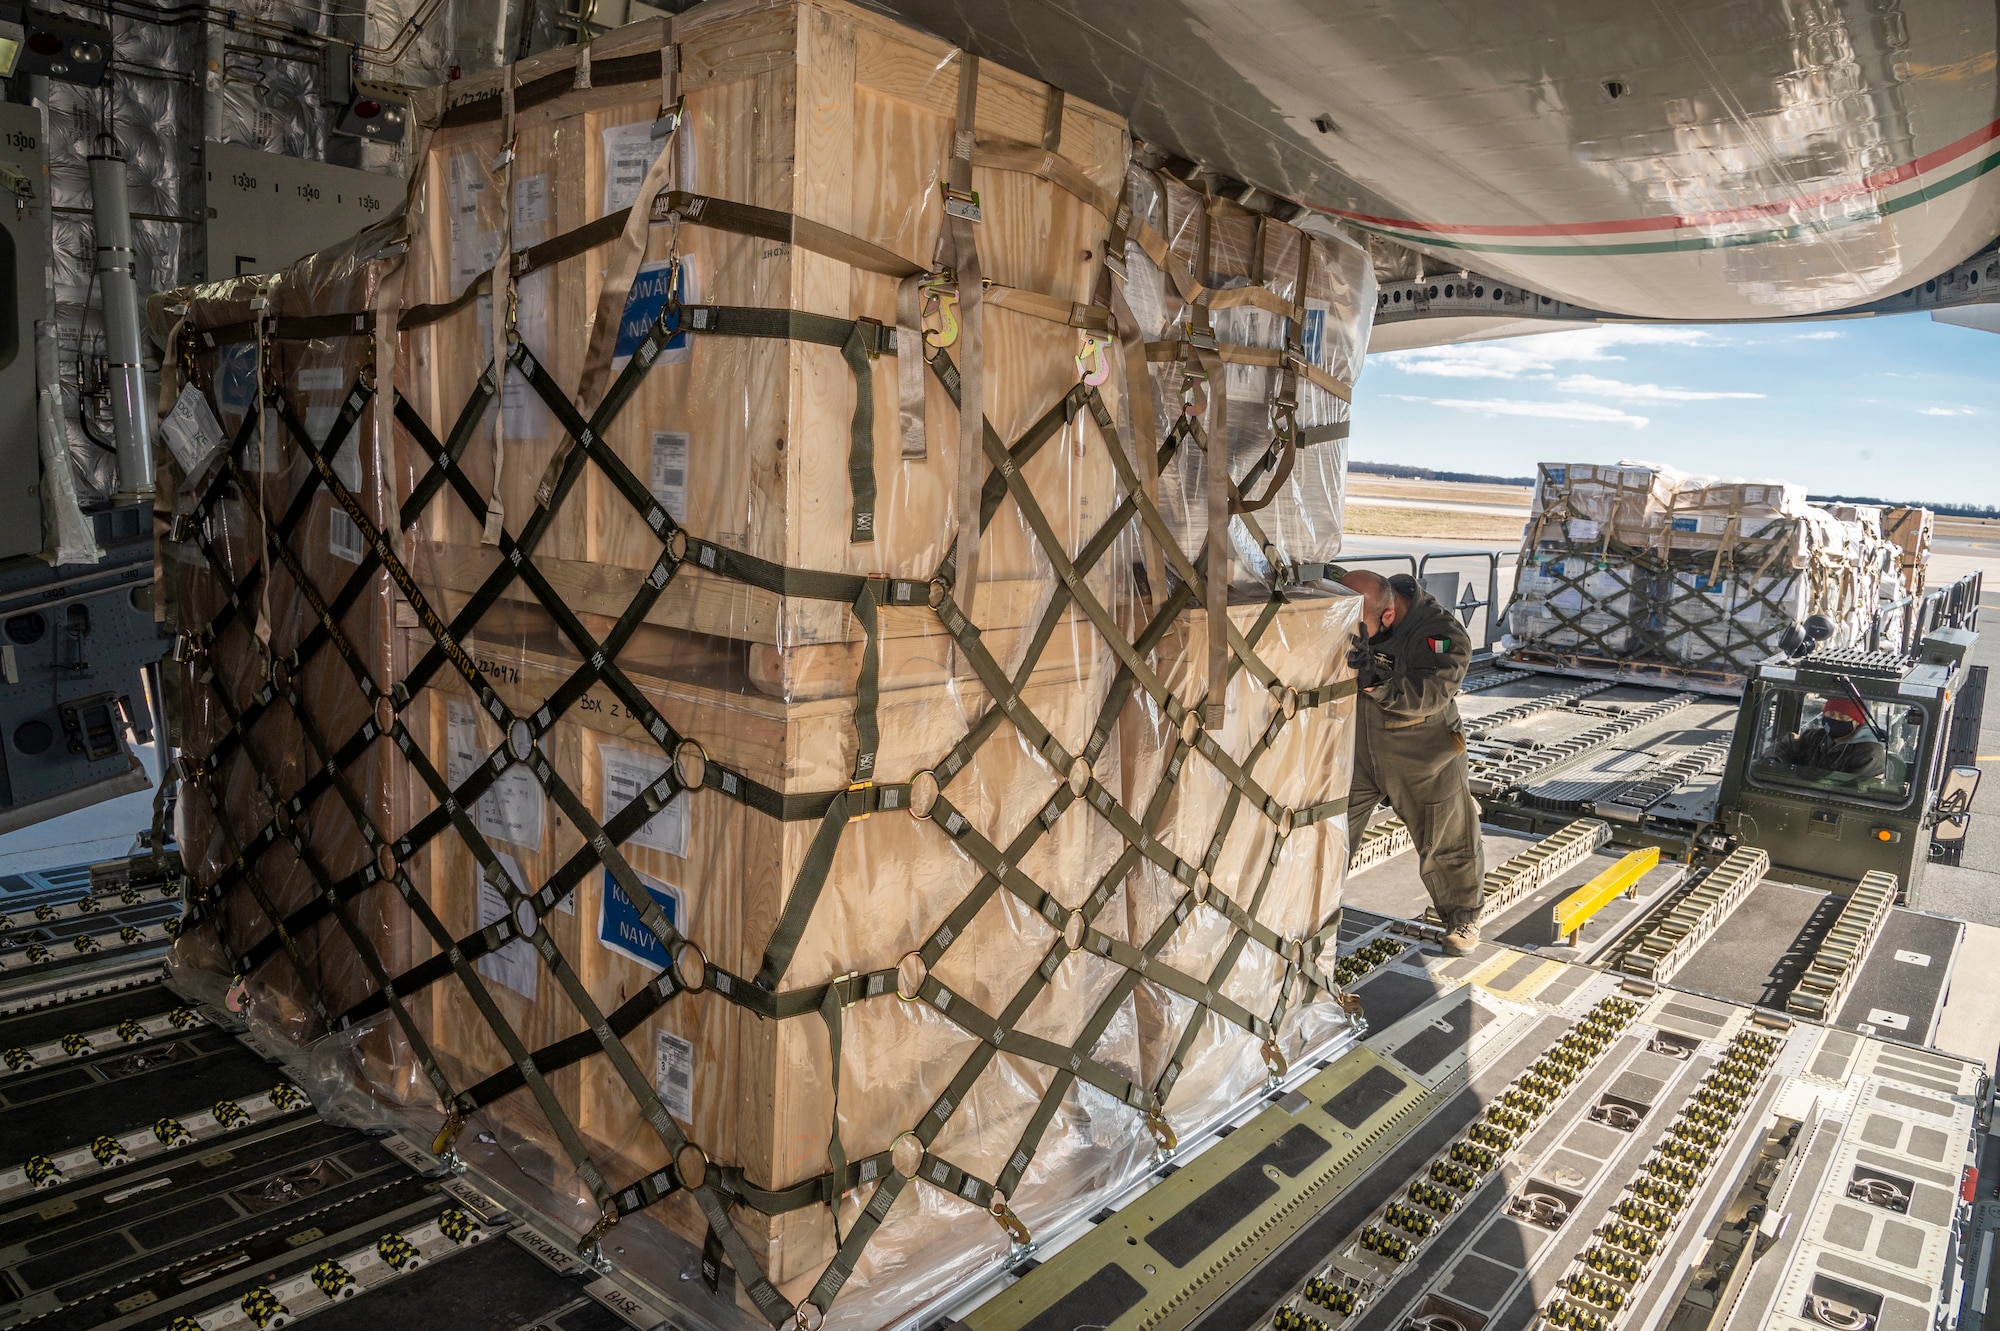 A Kuwait air force airman moves cargo onto a Kuwait air force C-17 Globemaster III at Dover Air Force Base, Delaware, Jan. 22, 2021. Kuwait is an important partner in U.S. counterterrorism efforts, providing assistance in the military, diplomatic, and intelligence arenas and also supporting efforts to block financing of terrorist groups. Due to its strategic geographic location, Dover AFB supports approximately $3.5 billion worth of foreign military sales operations annually. (U.S. Air Force photo by Senior Airman Christopher Quail)